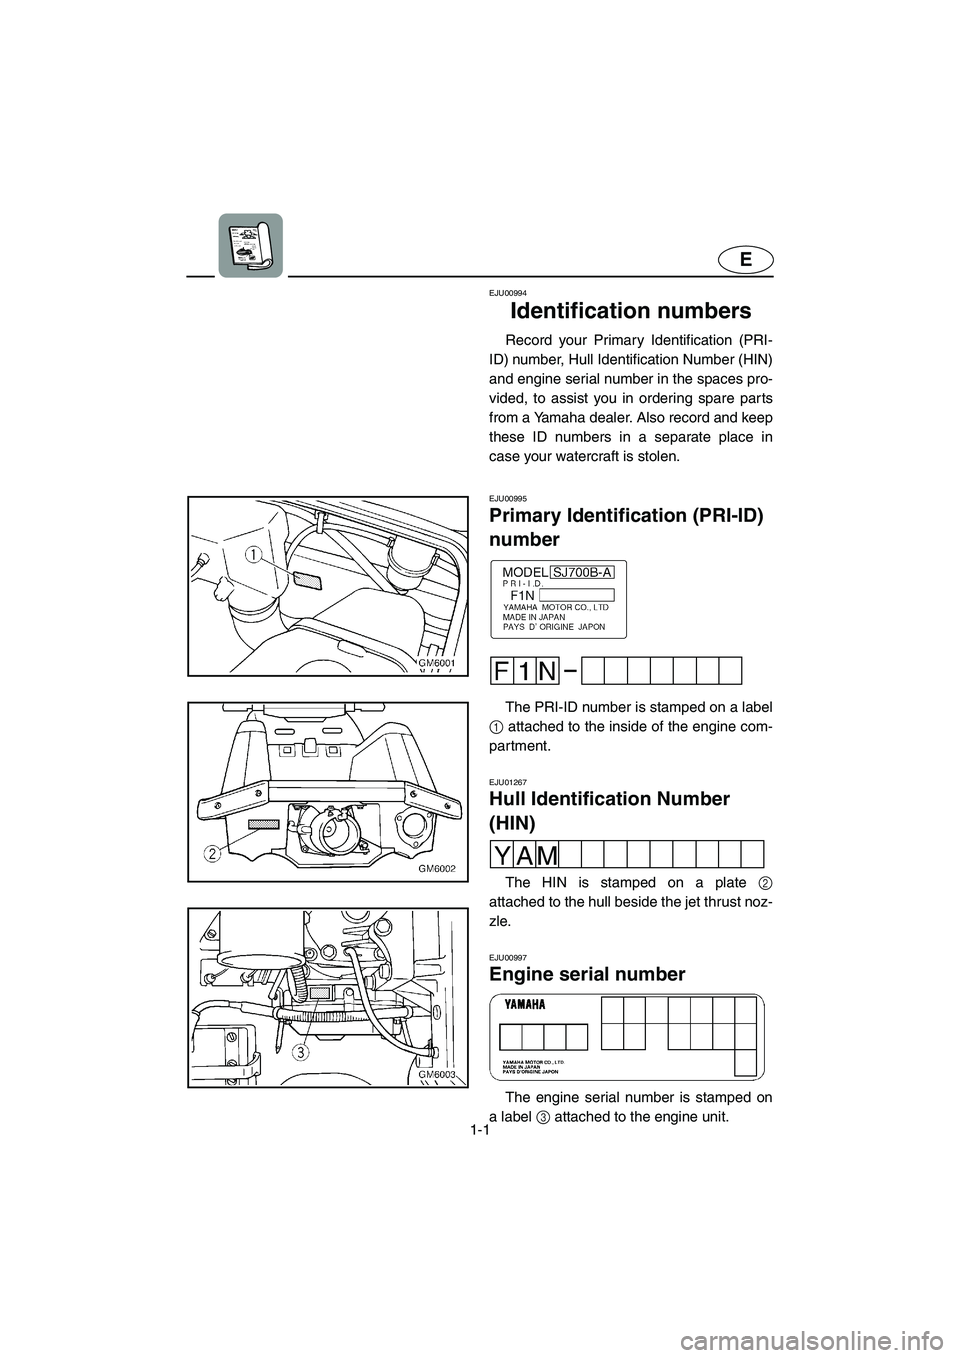 YAMAHA SUPERJET 2002  Owners Manual 1-1
E
EJU00994 
Identification numbers  
Record your Primary Identification (PRI-
ID) number, Hull Identification Number (HIN)
and engine serial number in the spaces pro-
vided, to assist you in order